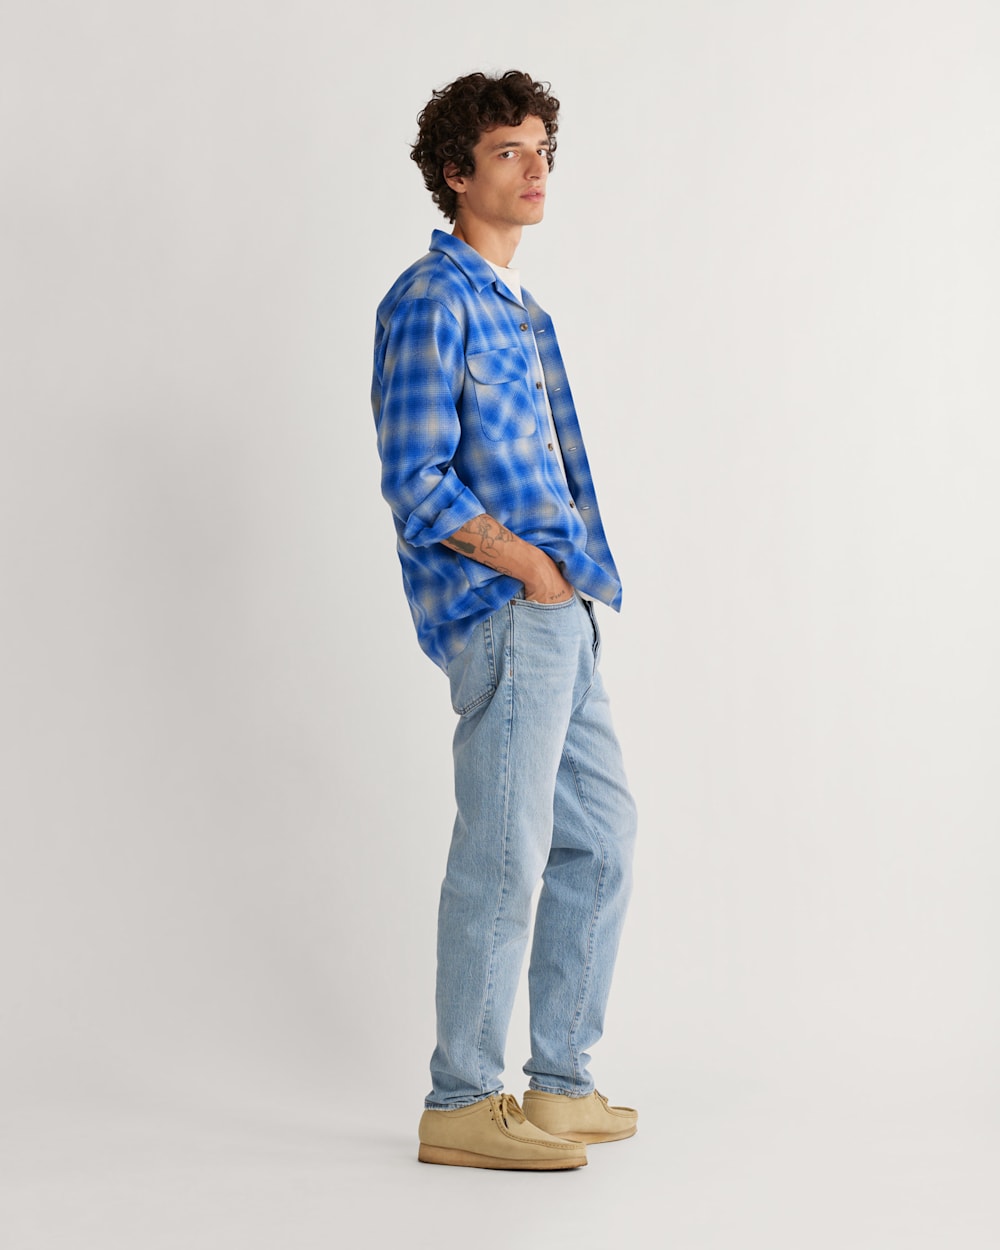 ALTERNATE VIEW OF MEN'S PLAID BOARD SHIRT IN BLUE OMBRE image number 1